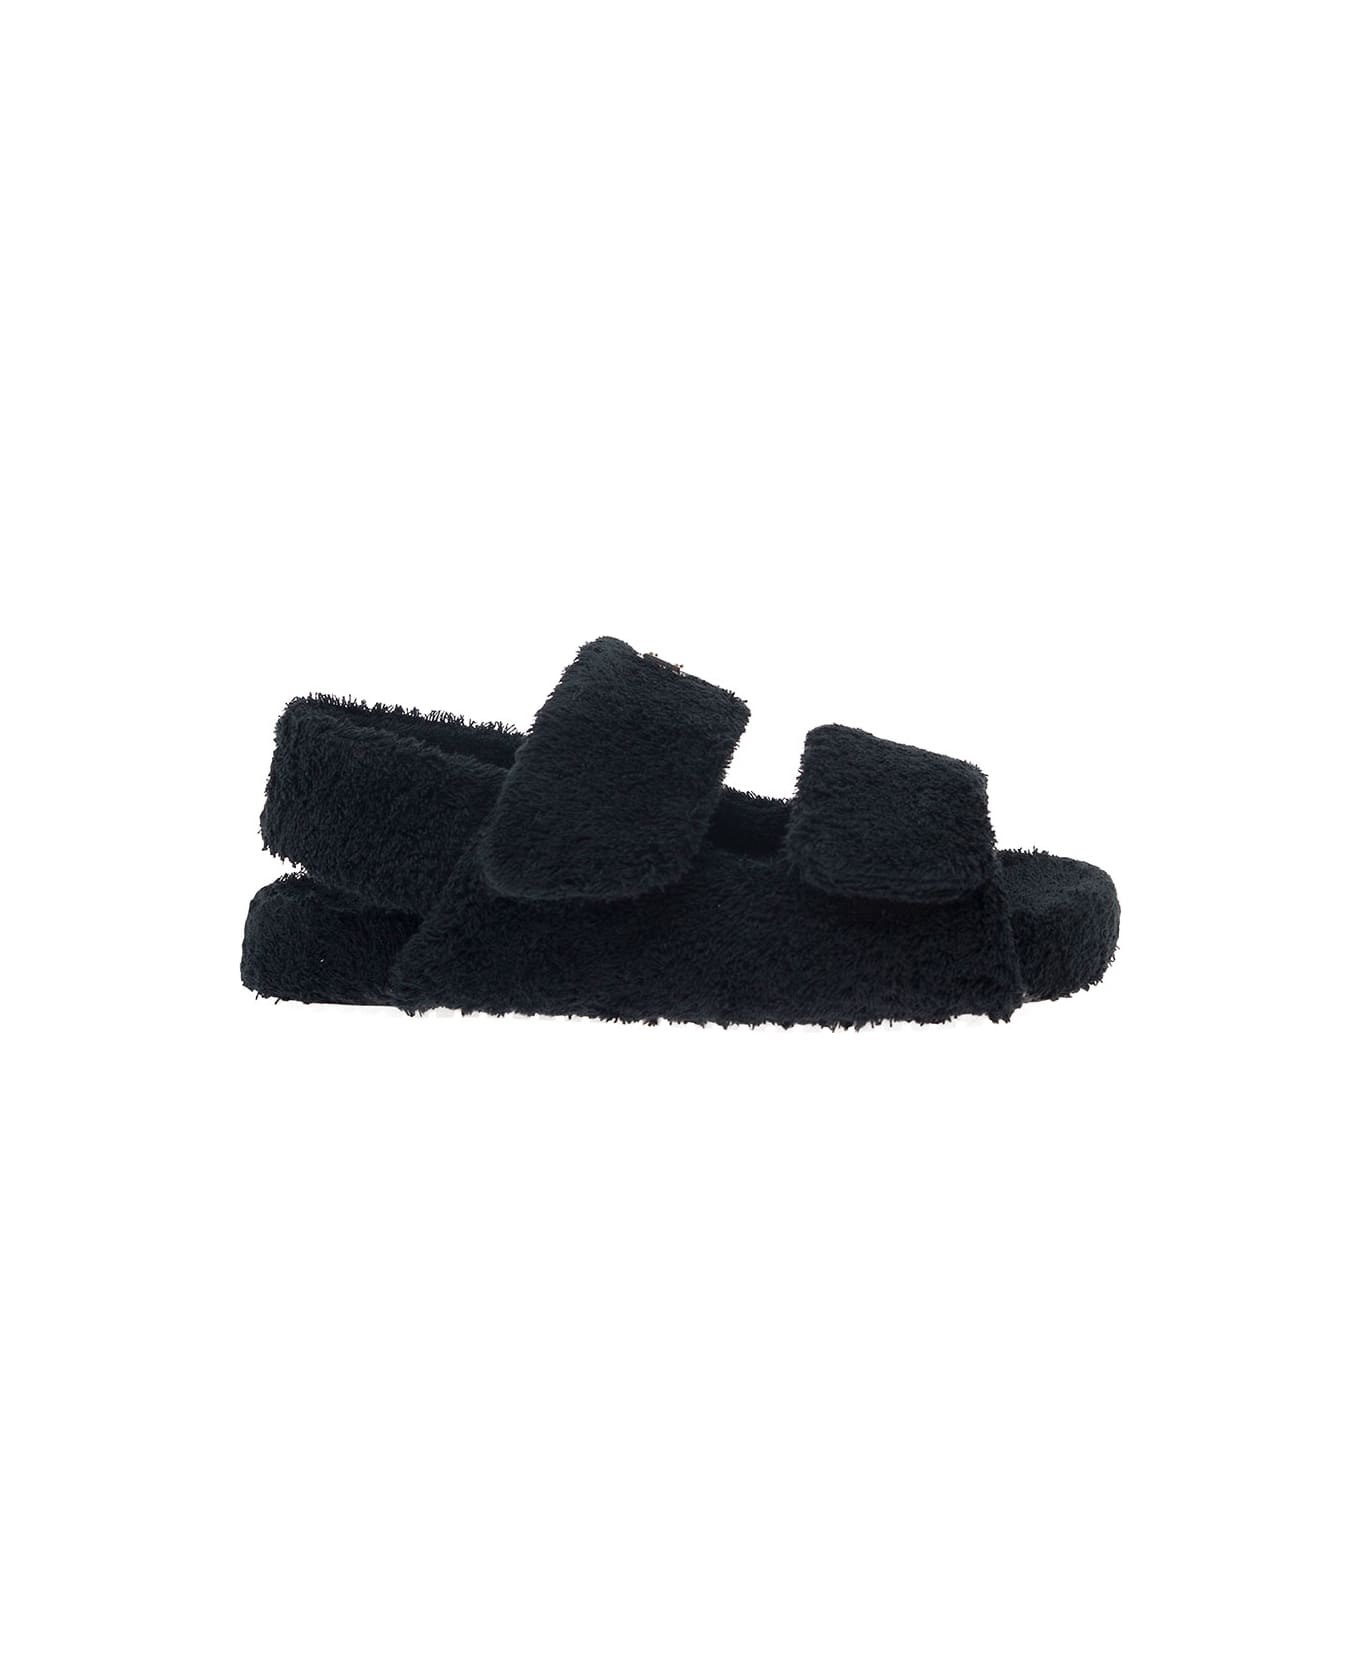 Dolce & Gabbana Black Sandals With Logo Plaque And Hook-and-loop Fastening In Terrycloth Man - Black